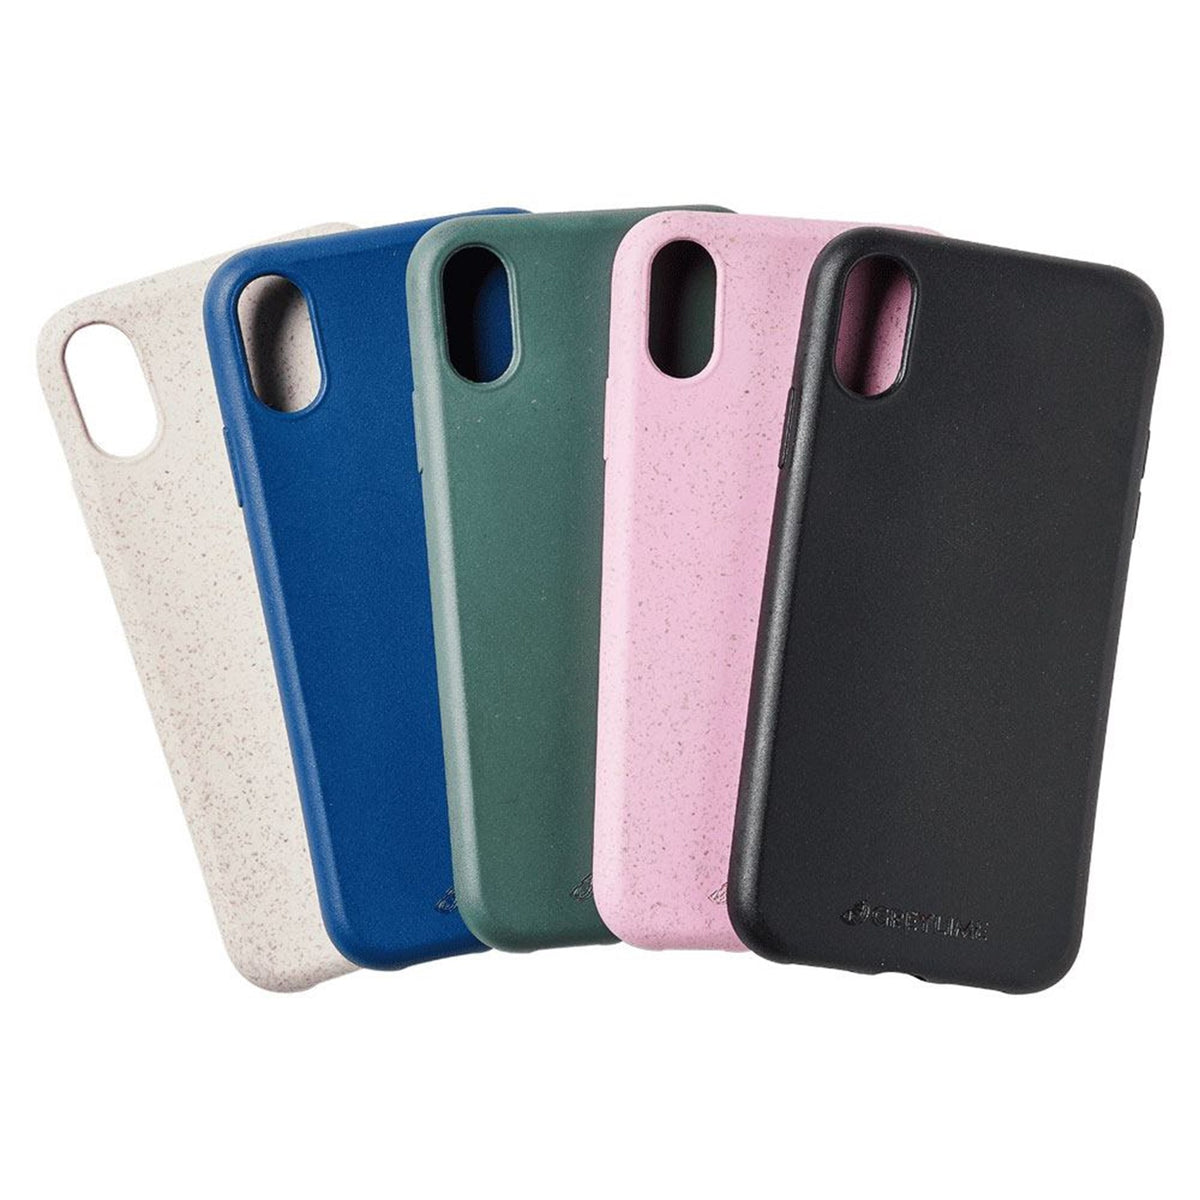 GreyLime-iPhone-XR-biodegradable-cover-COIPXR-gruppe-1.jpg